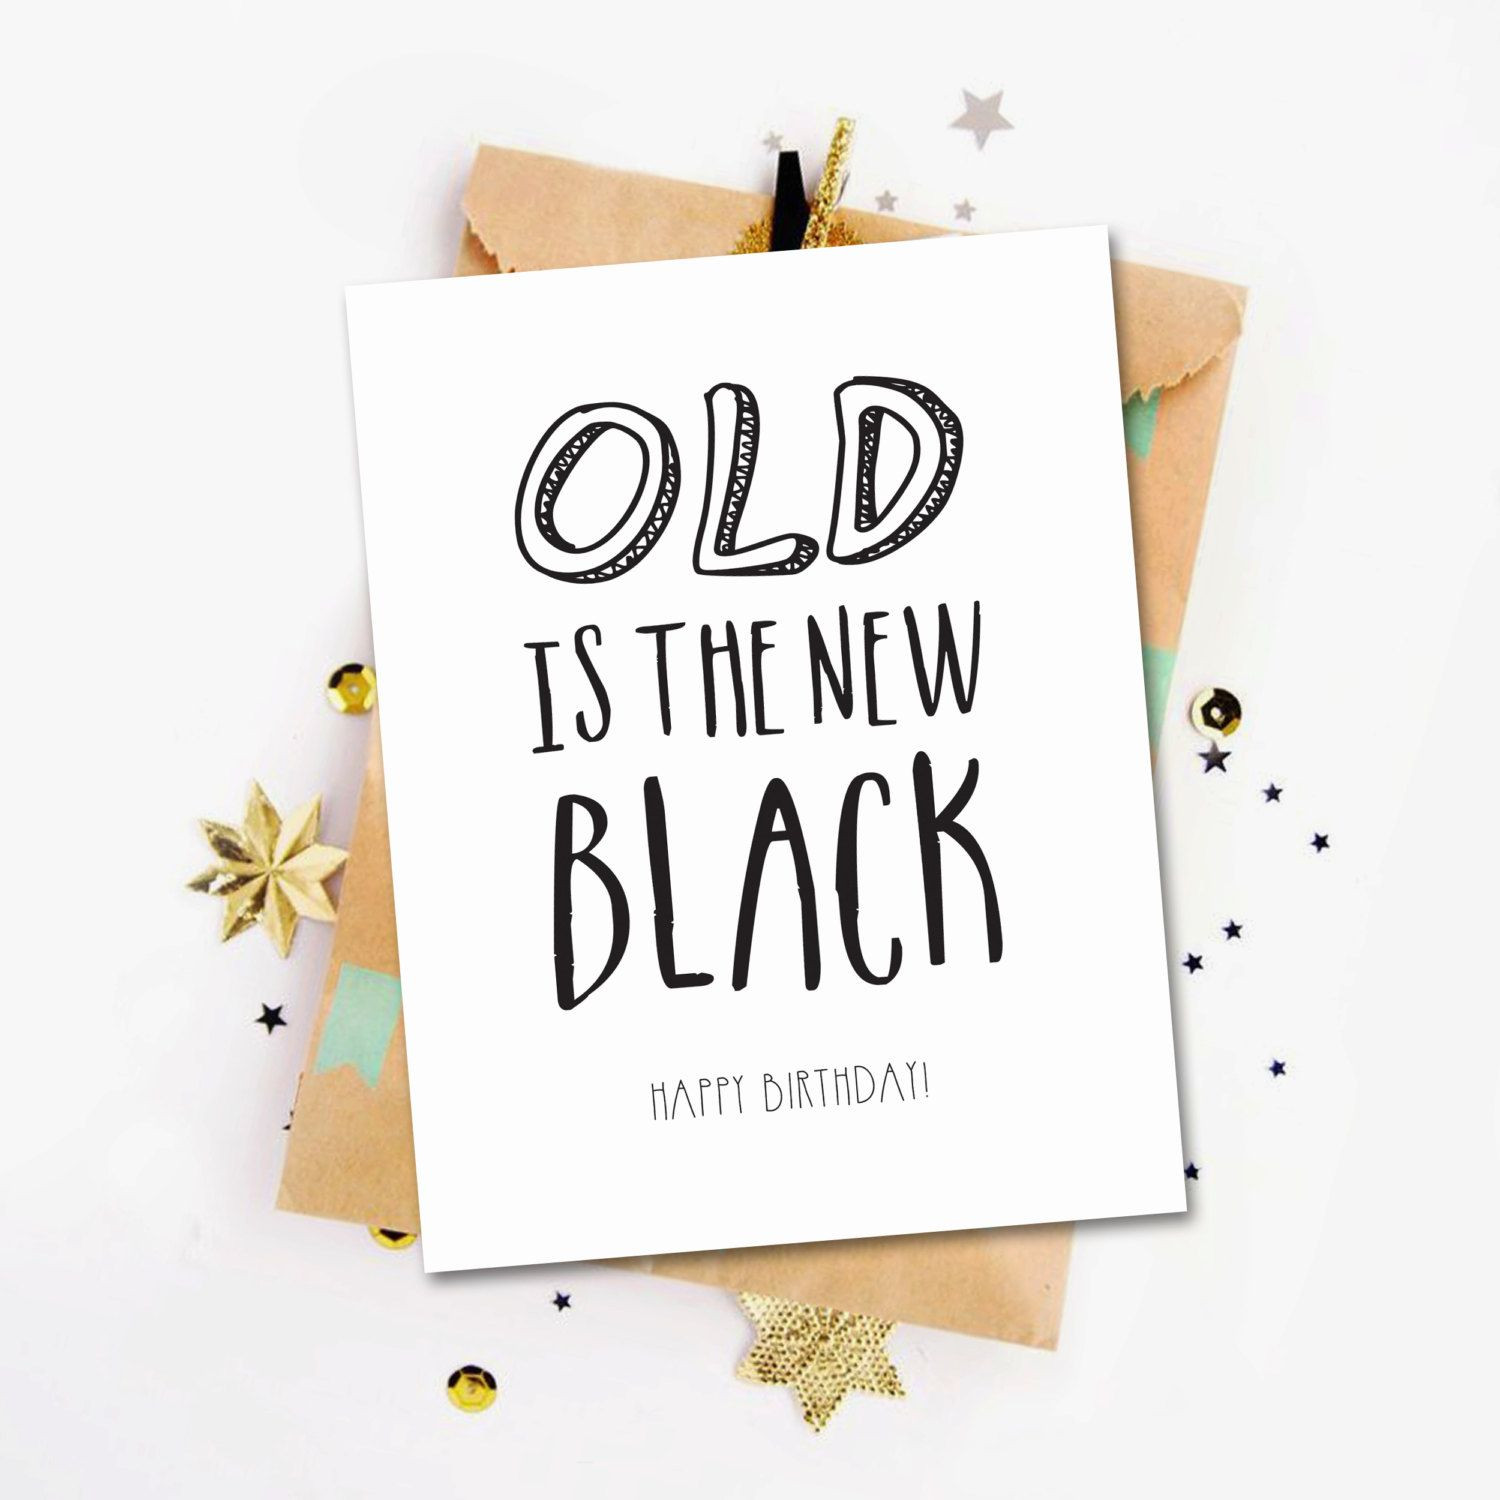 Funny Ways To Wish Happy Birthday
 Funny birthday card Old Is The New Black greeting card A